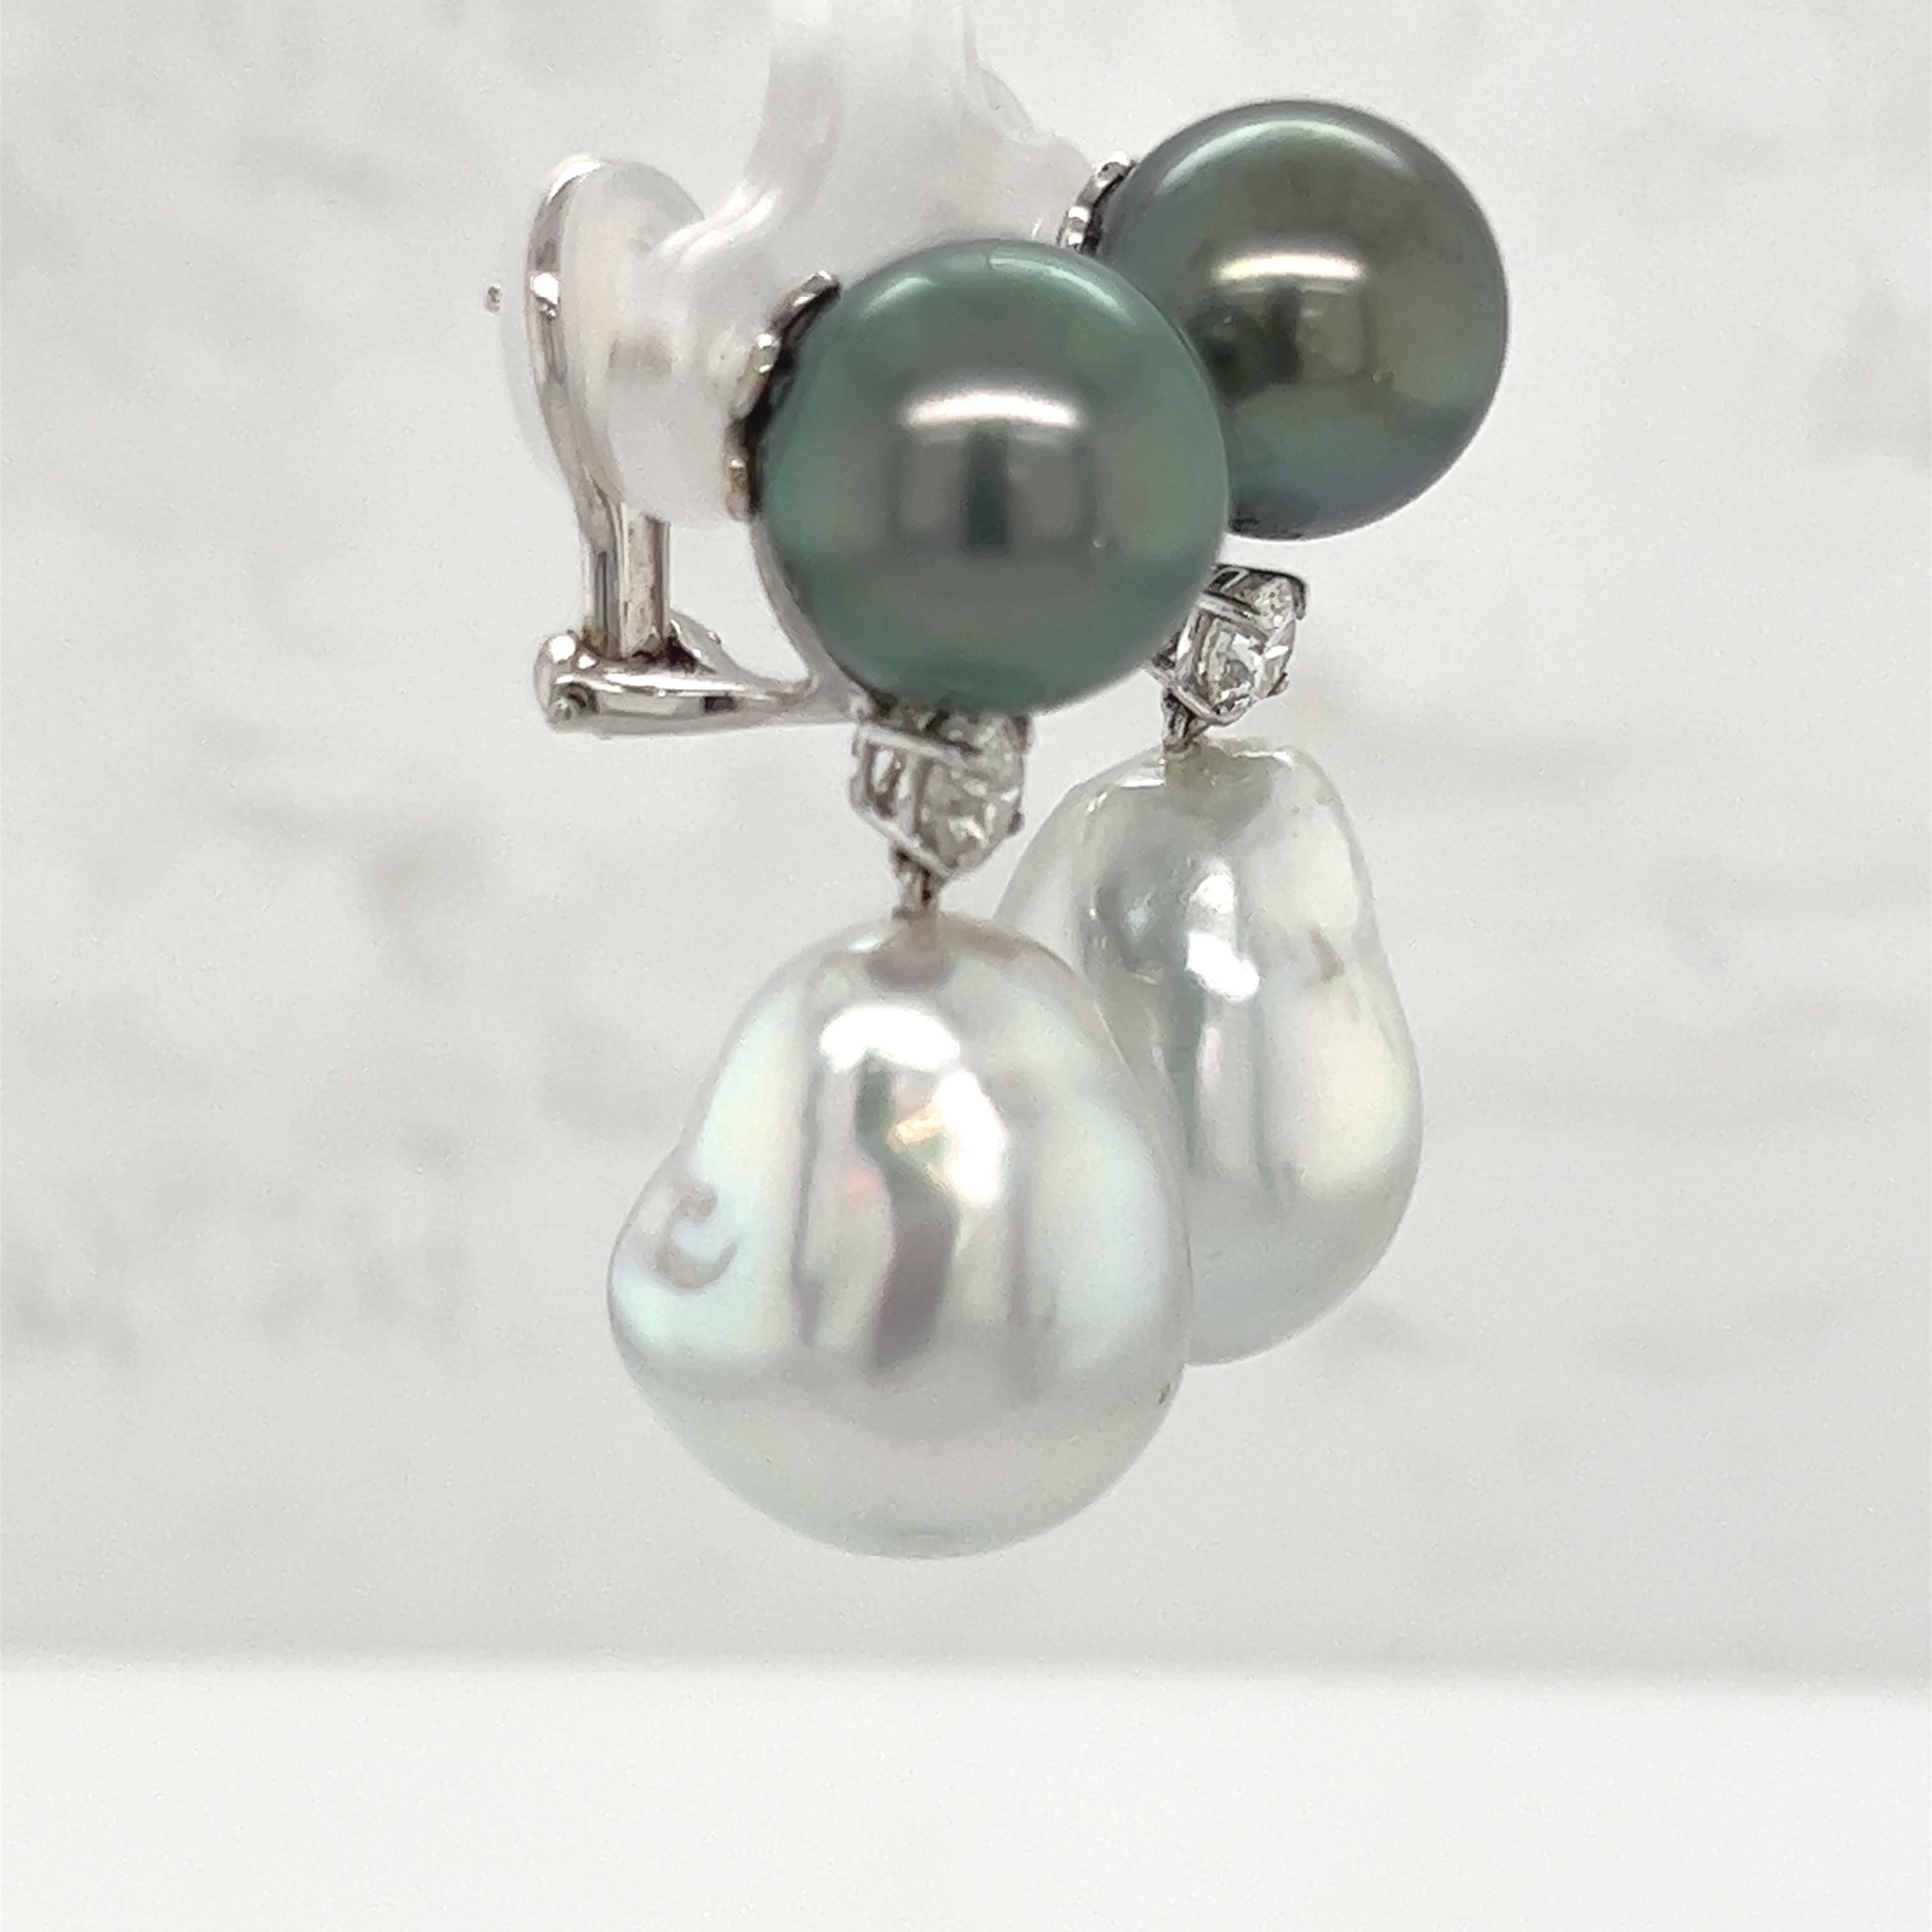 South Sea Pearl and Diamond Earrings with 14.00-12.00mm pearls. The top pearl is Tahitian and the bottom pearl is silvery-white Baroque. the earrings are 1 1/4